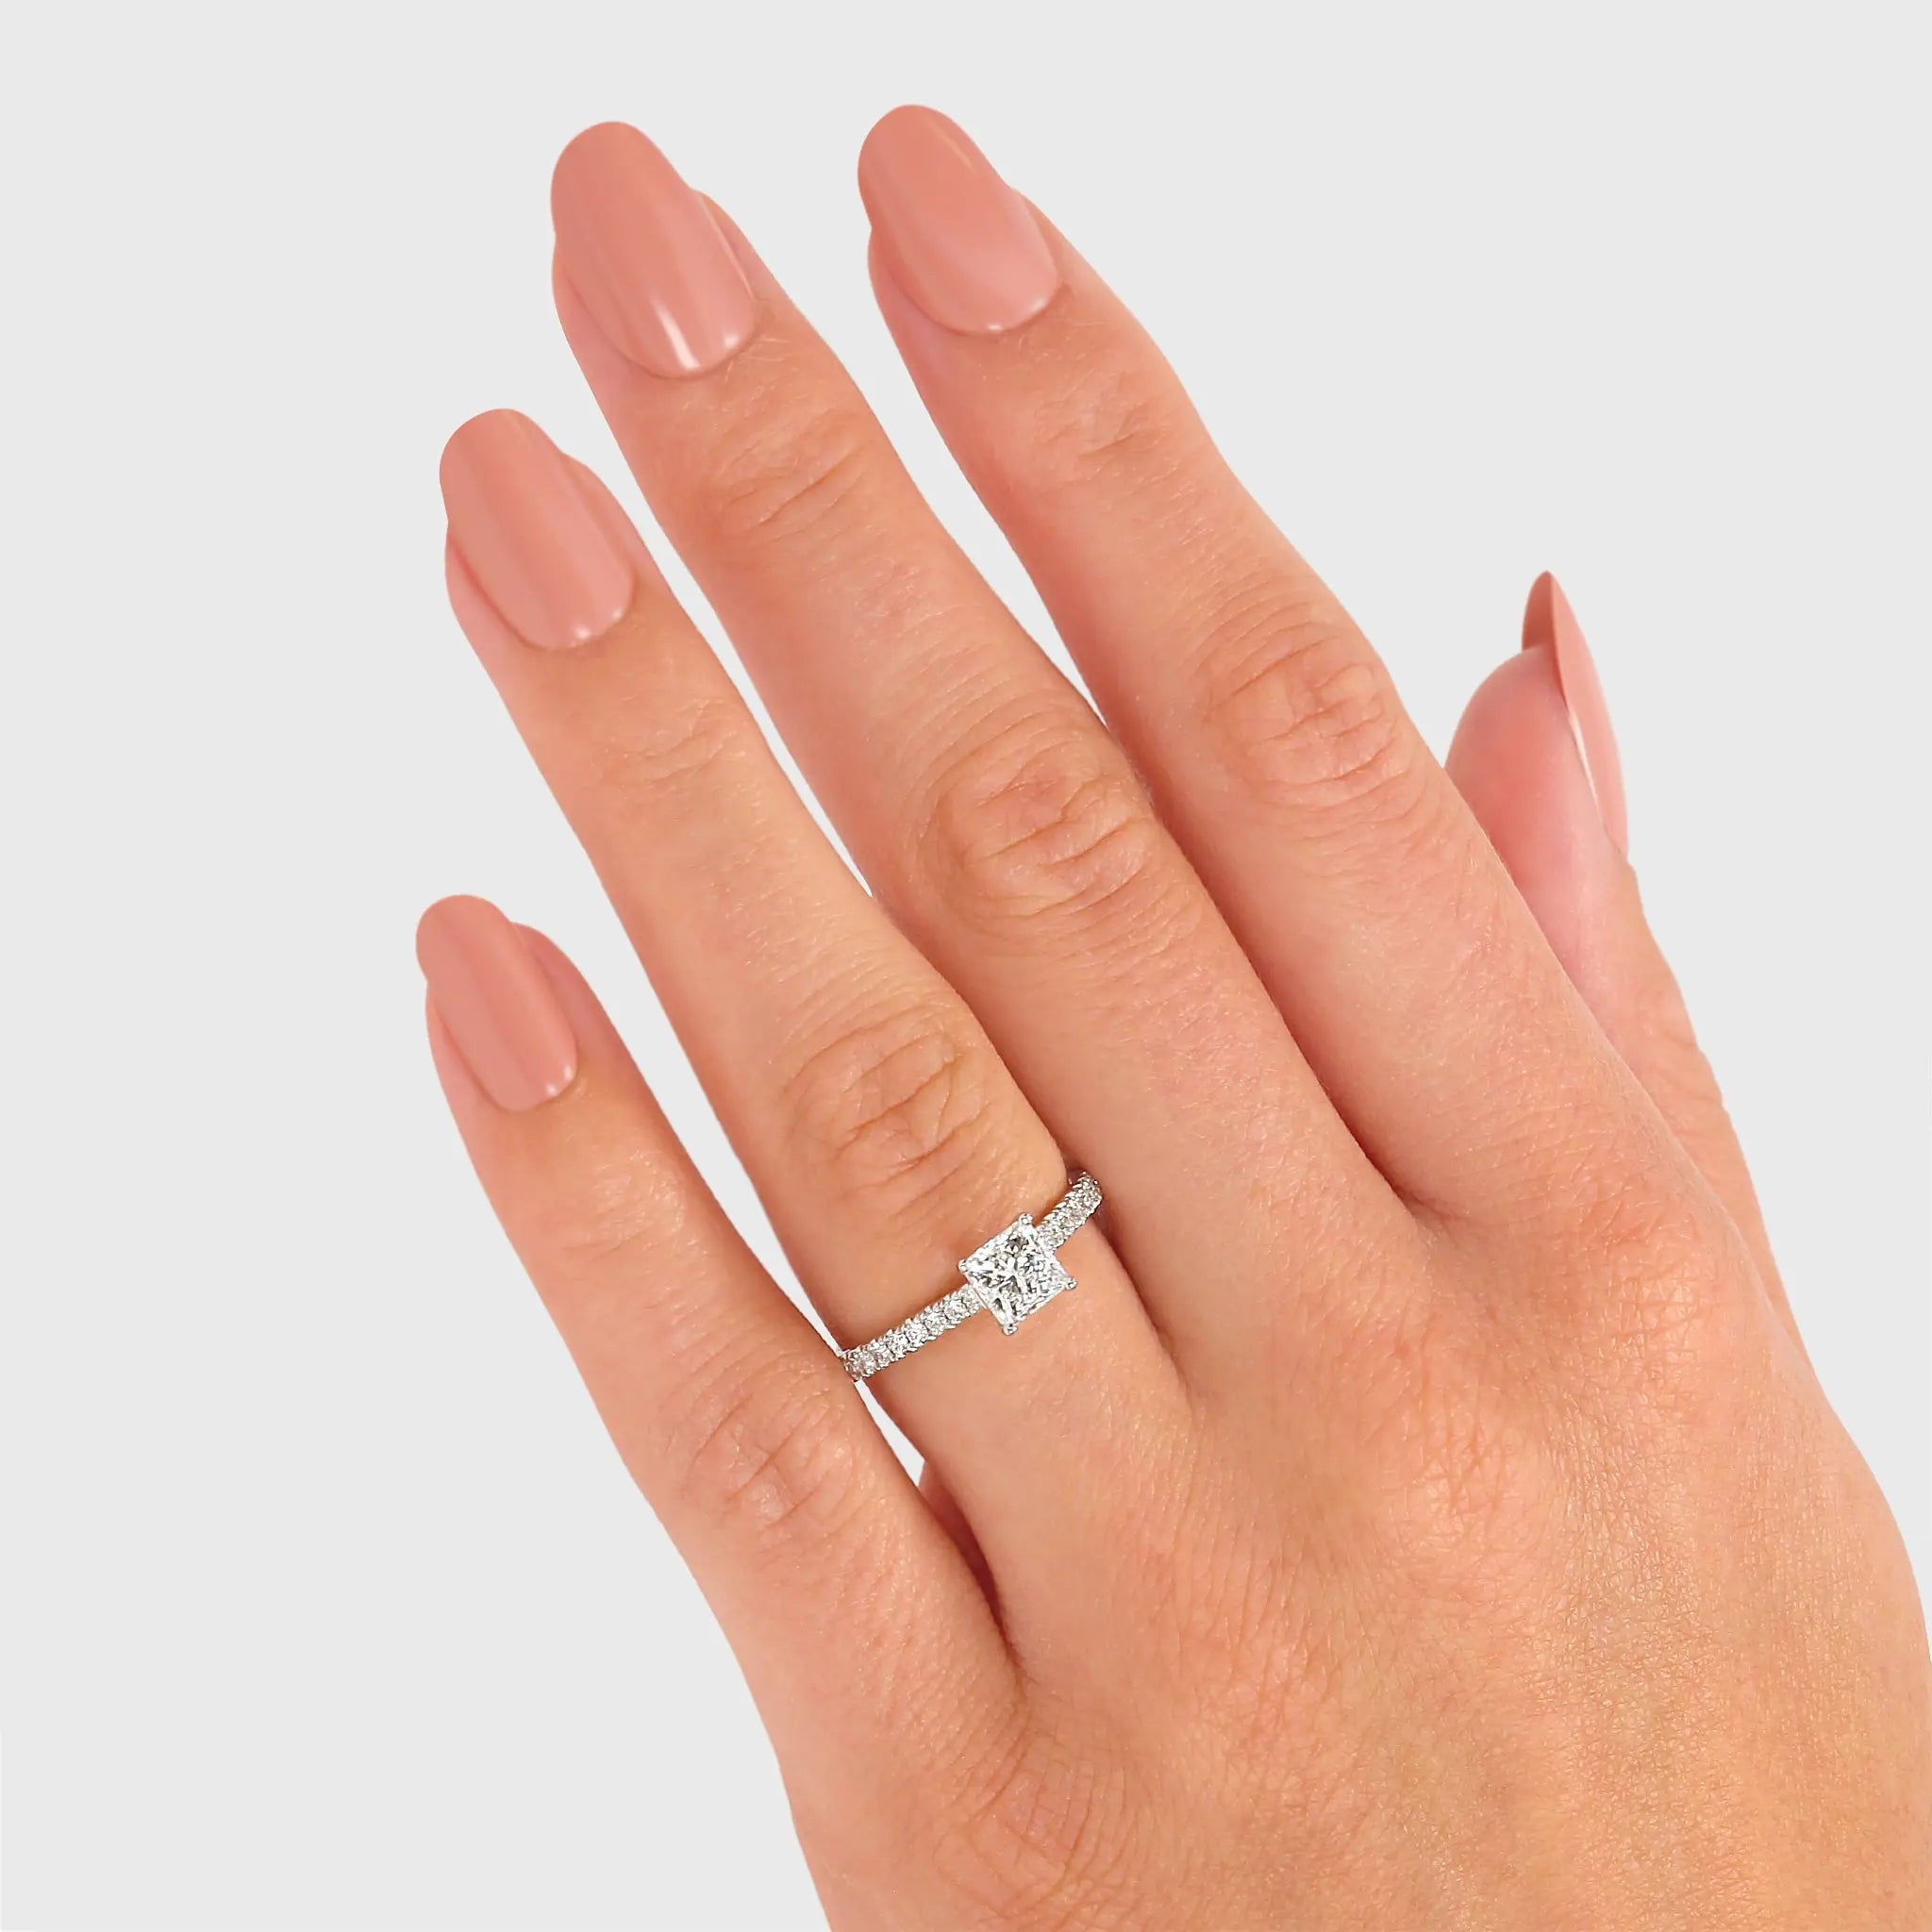 Shimansky - Women Wearing the My Girl Microset Diamond Engagement Ring 0.70ct Crafted in 18K White Gold